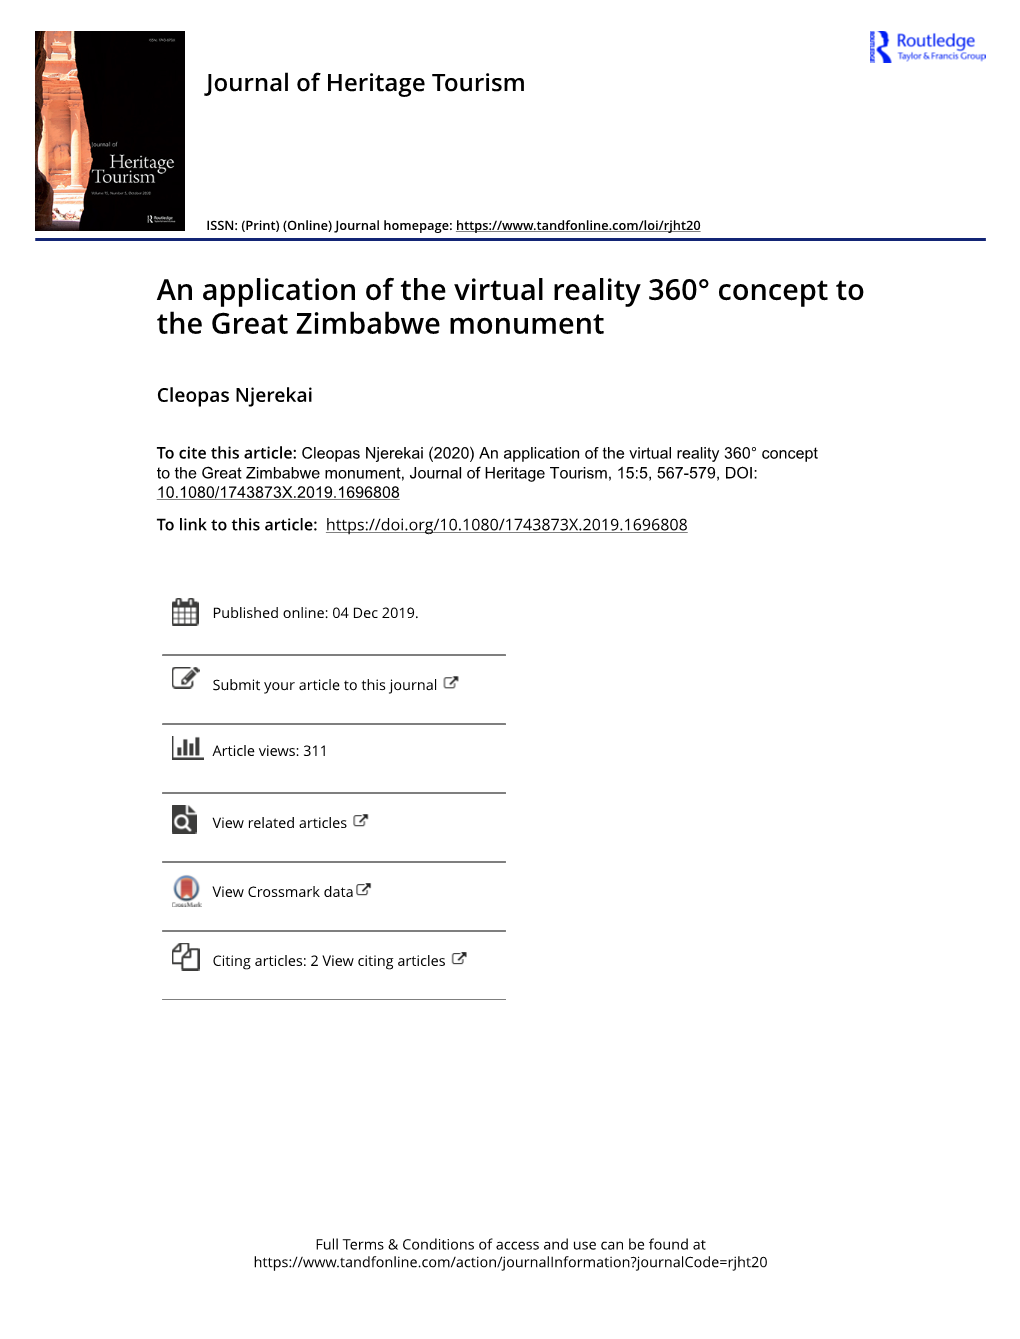 An Application of the Virtual Reality 360° Concept to the Great Zimbabwe Monument